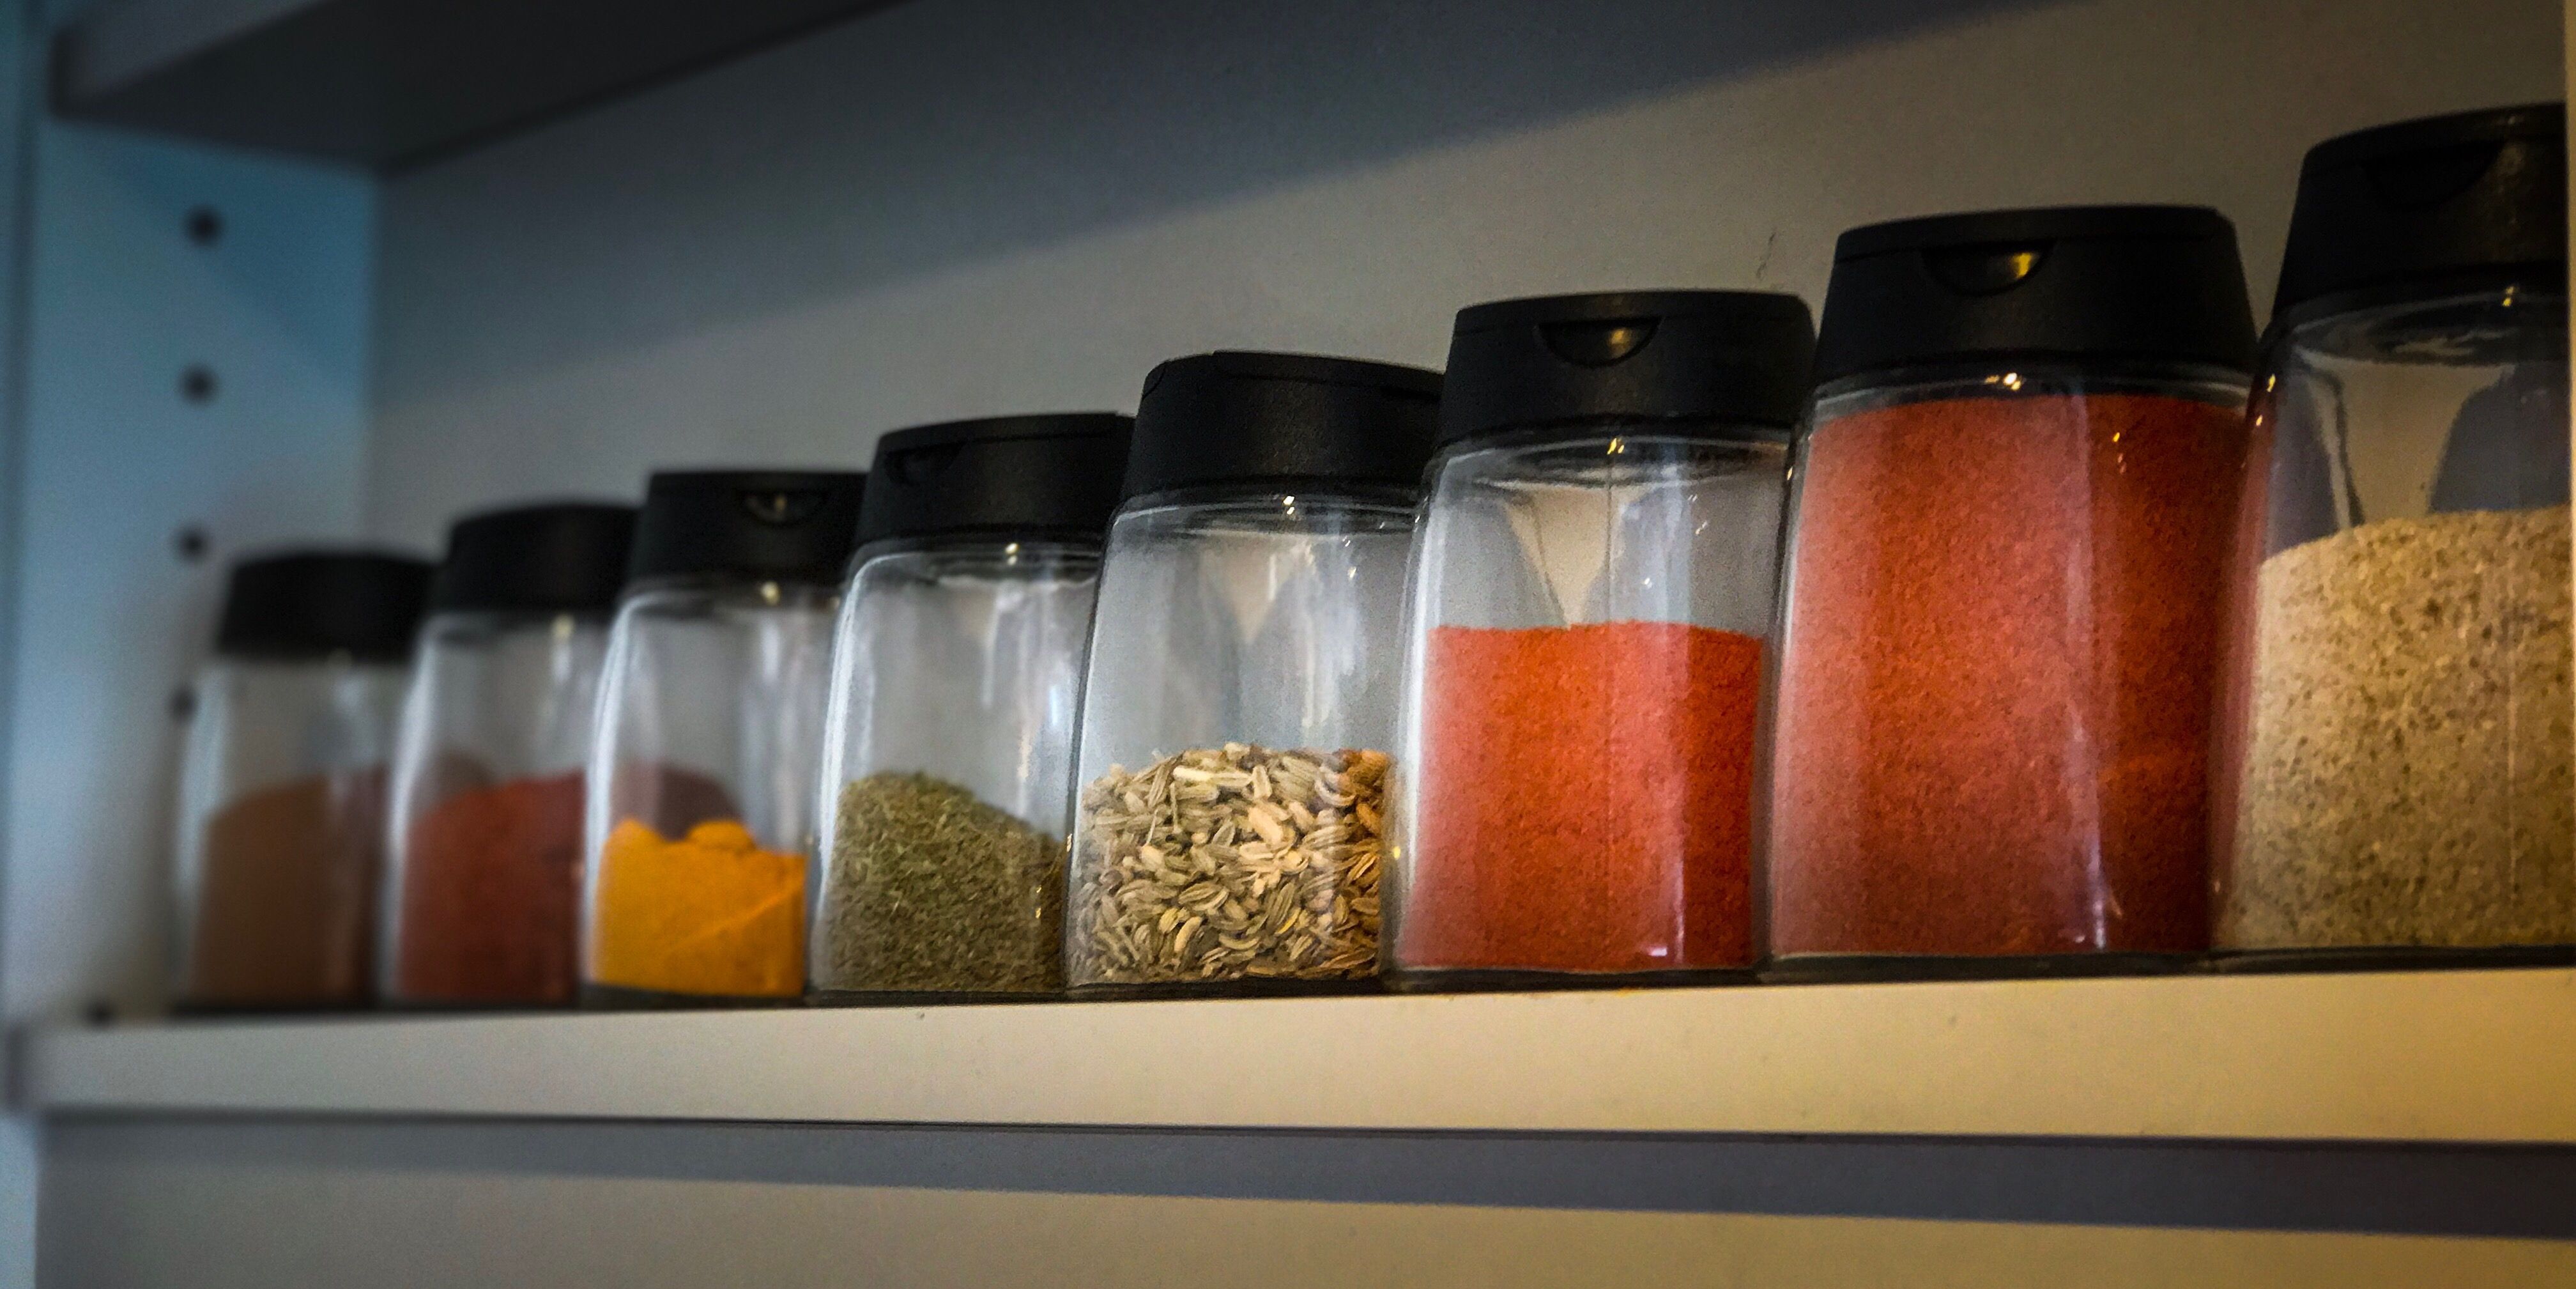 https://hips.hearstapps.com/hmg-prod/images/close-up-of-shelf-with-jars-of-spices-royalty-free-image-1032733988-1546010502.jpg